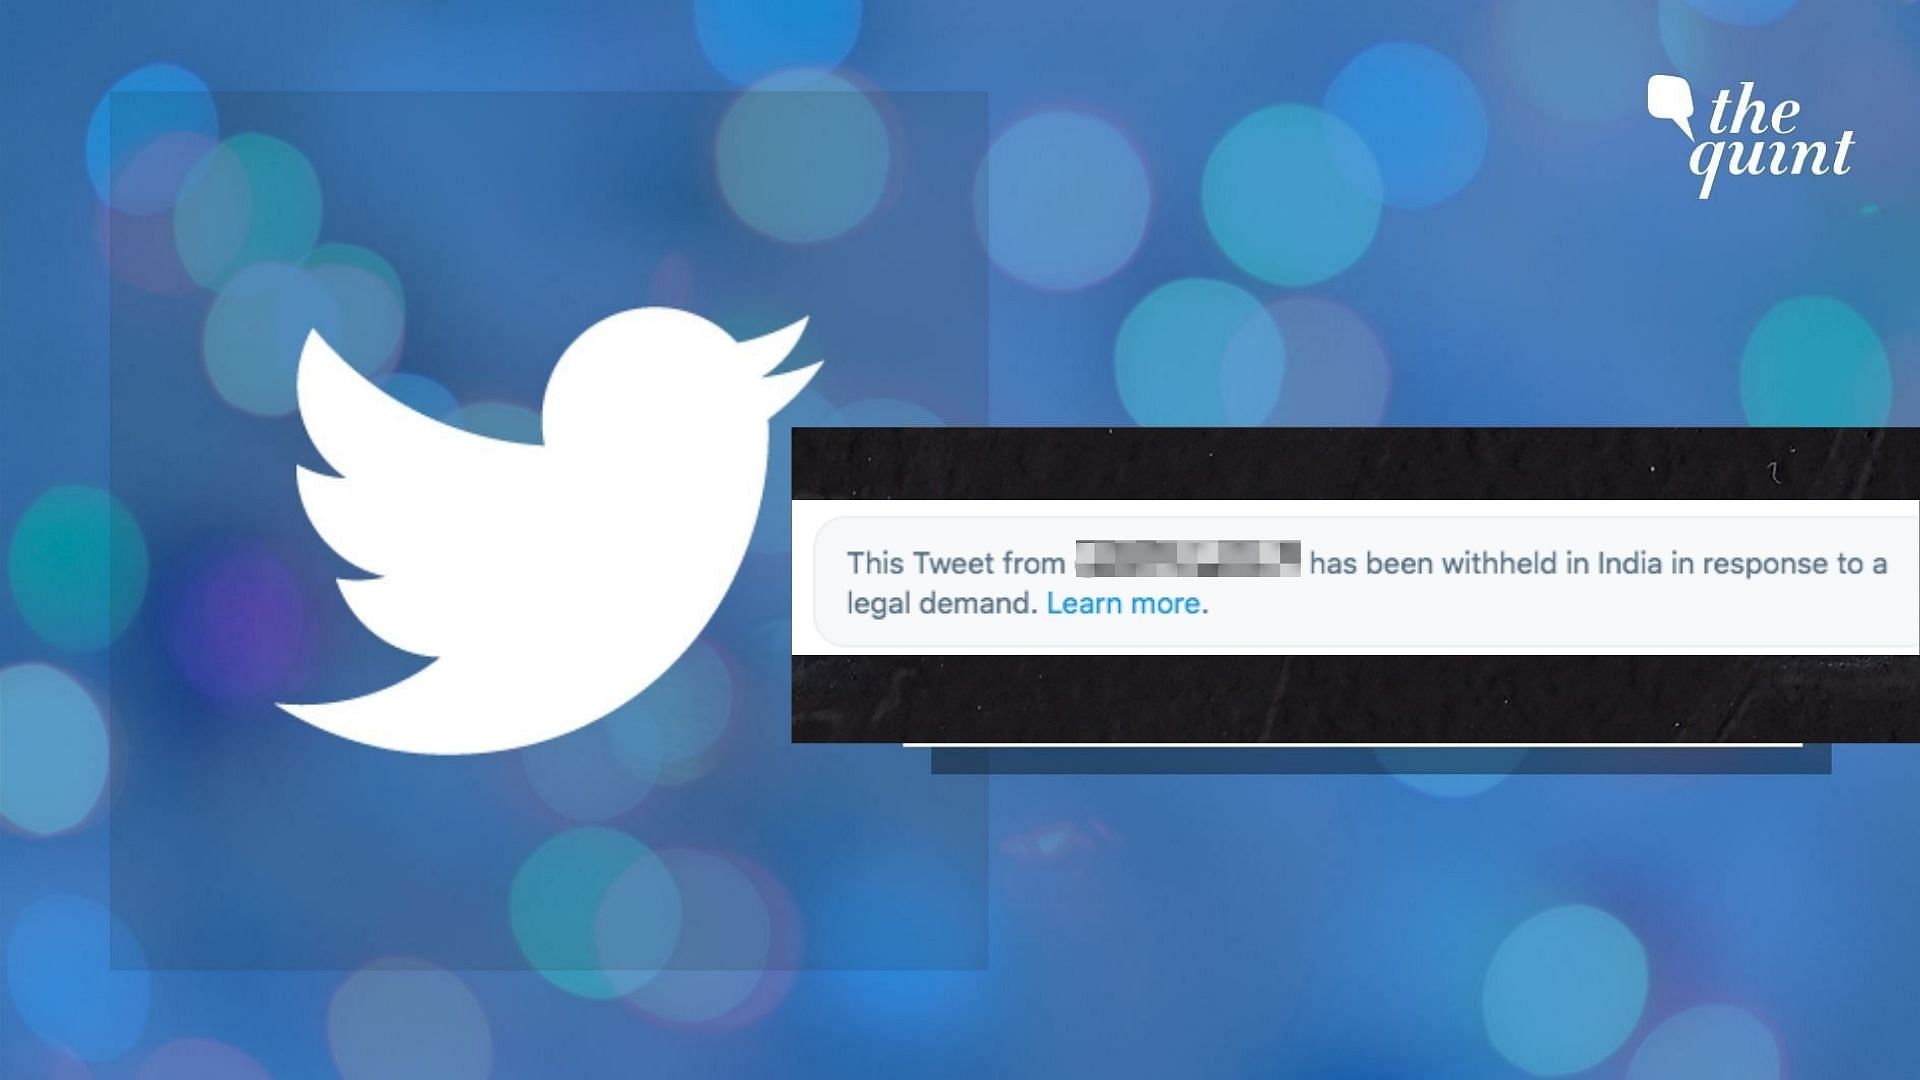 Complying with the government’s requests, Twitter has censored 52 tweets that were critical of the government’s actions around the second surge of COVID-19.